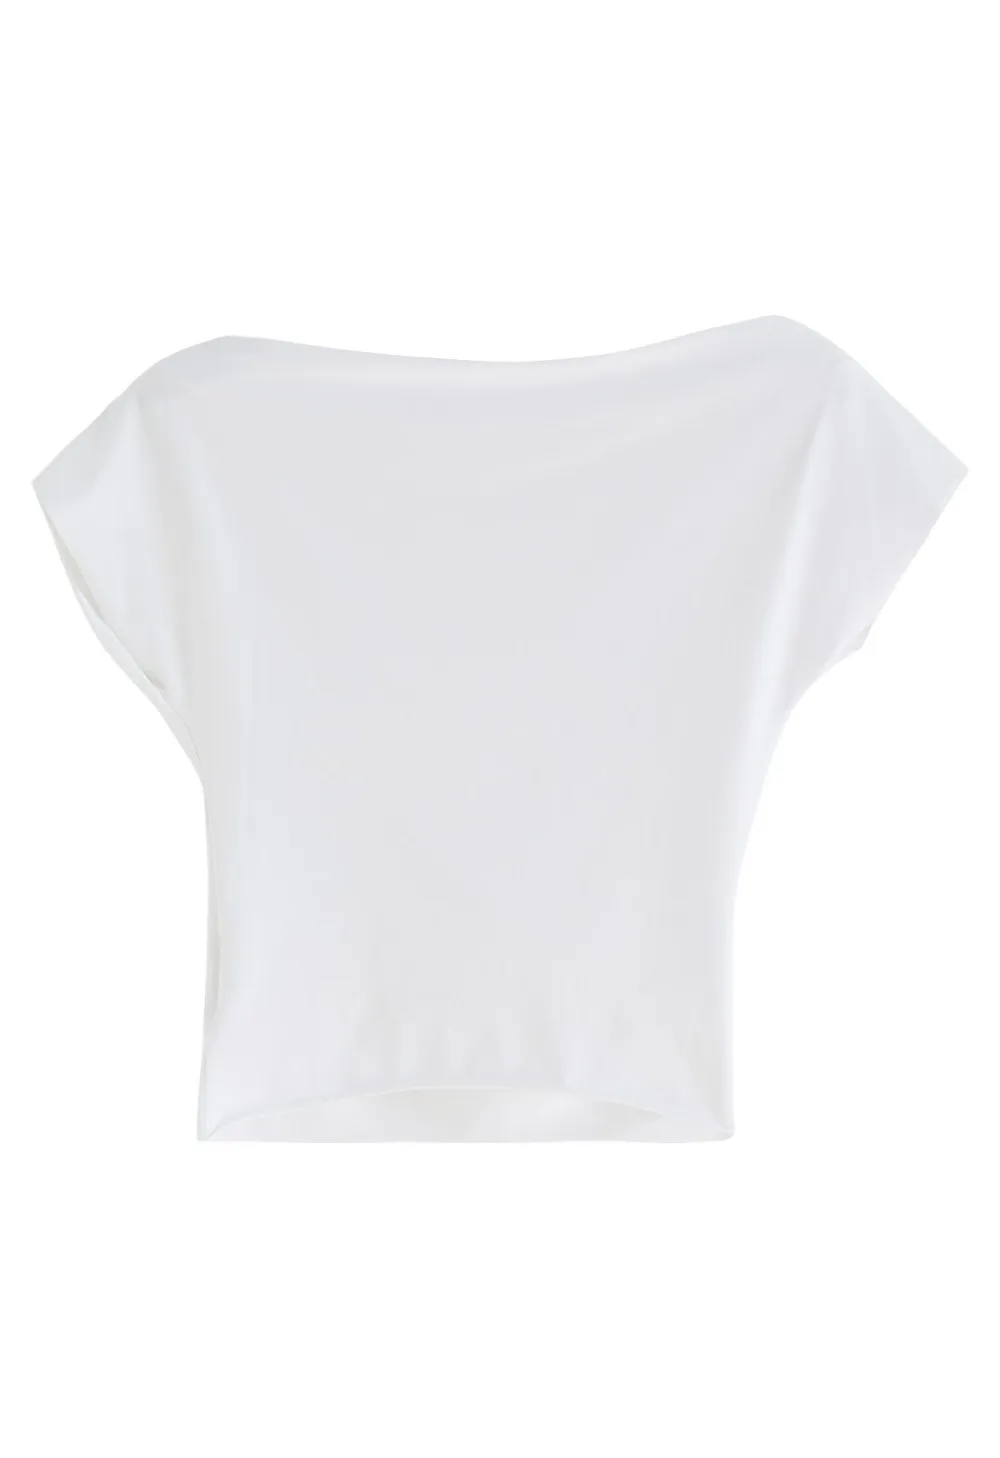 ASYMMETRIC BOAT NECK RUCHED TOP IN WHITE